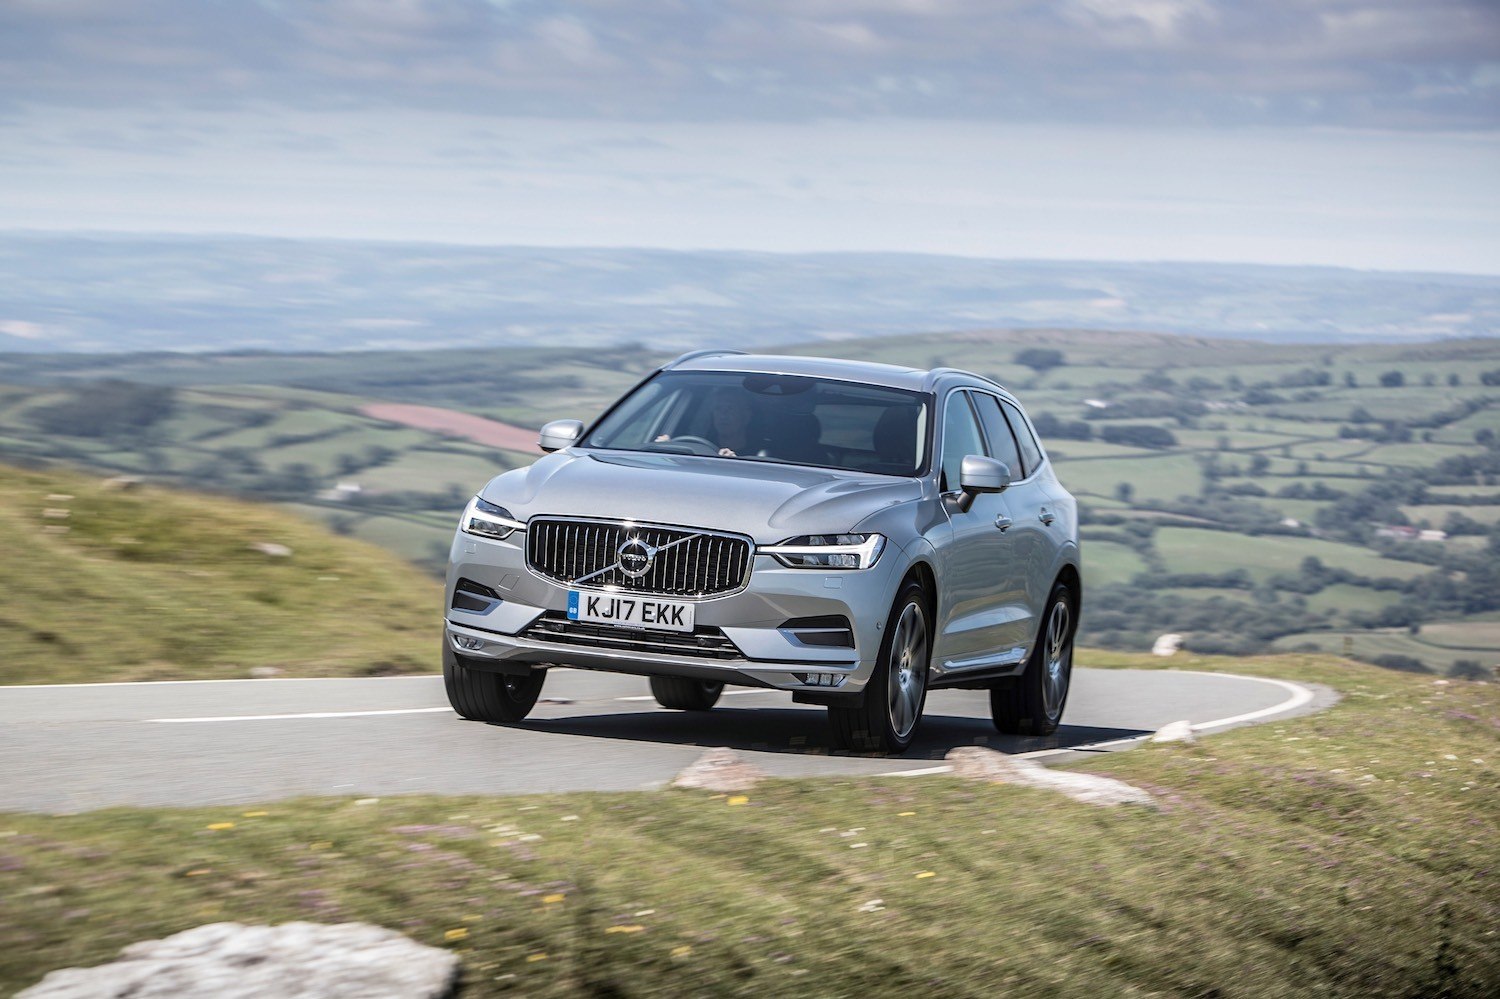 Neil Lyndon reviews the All New Volvo XC60 for Drive 15